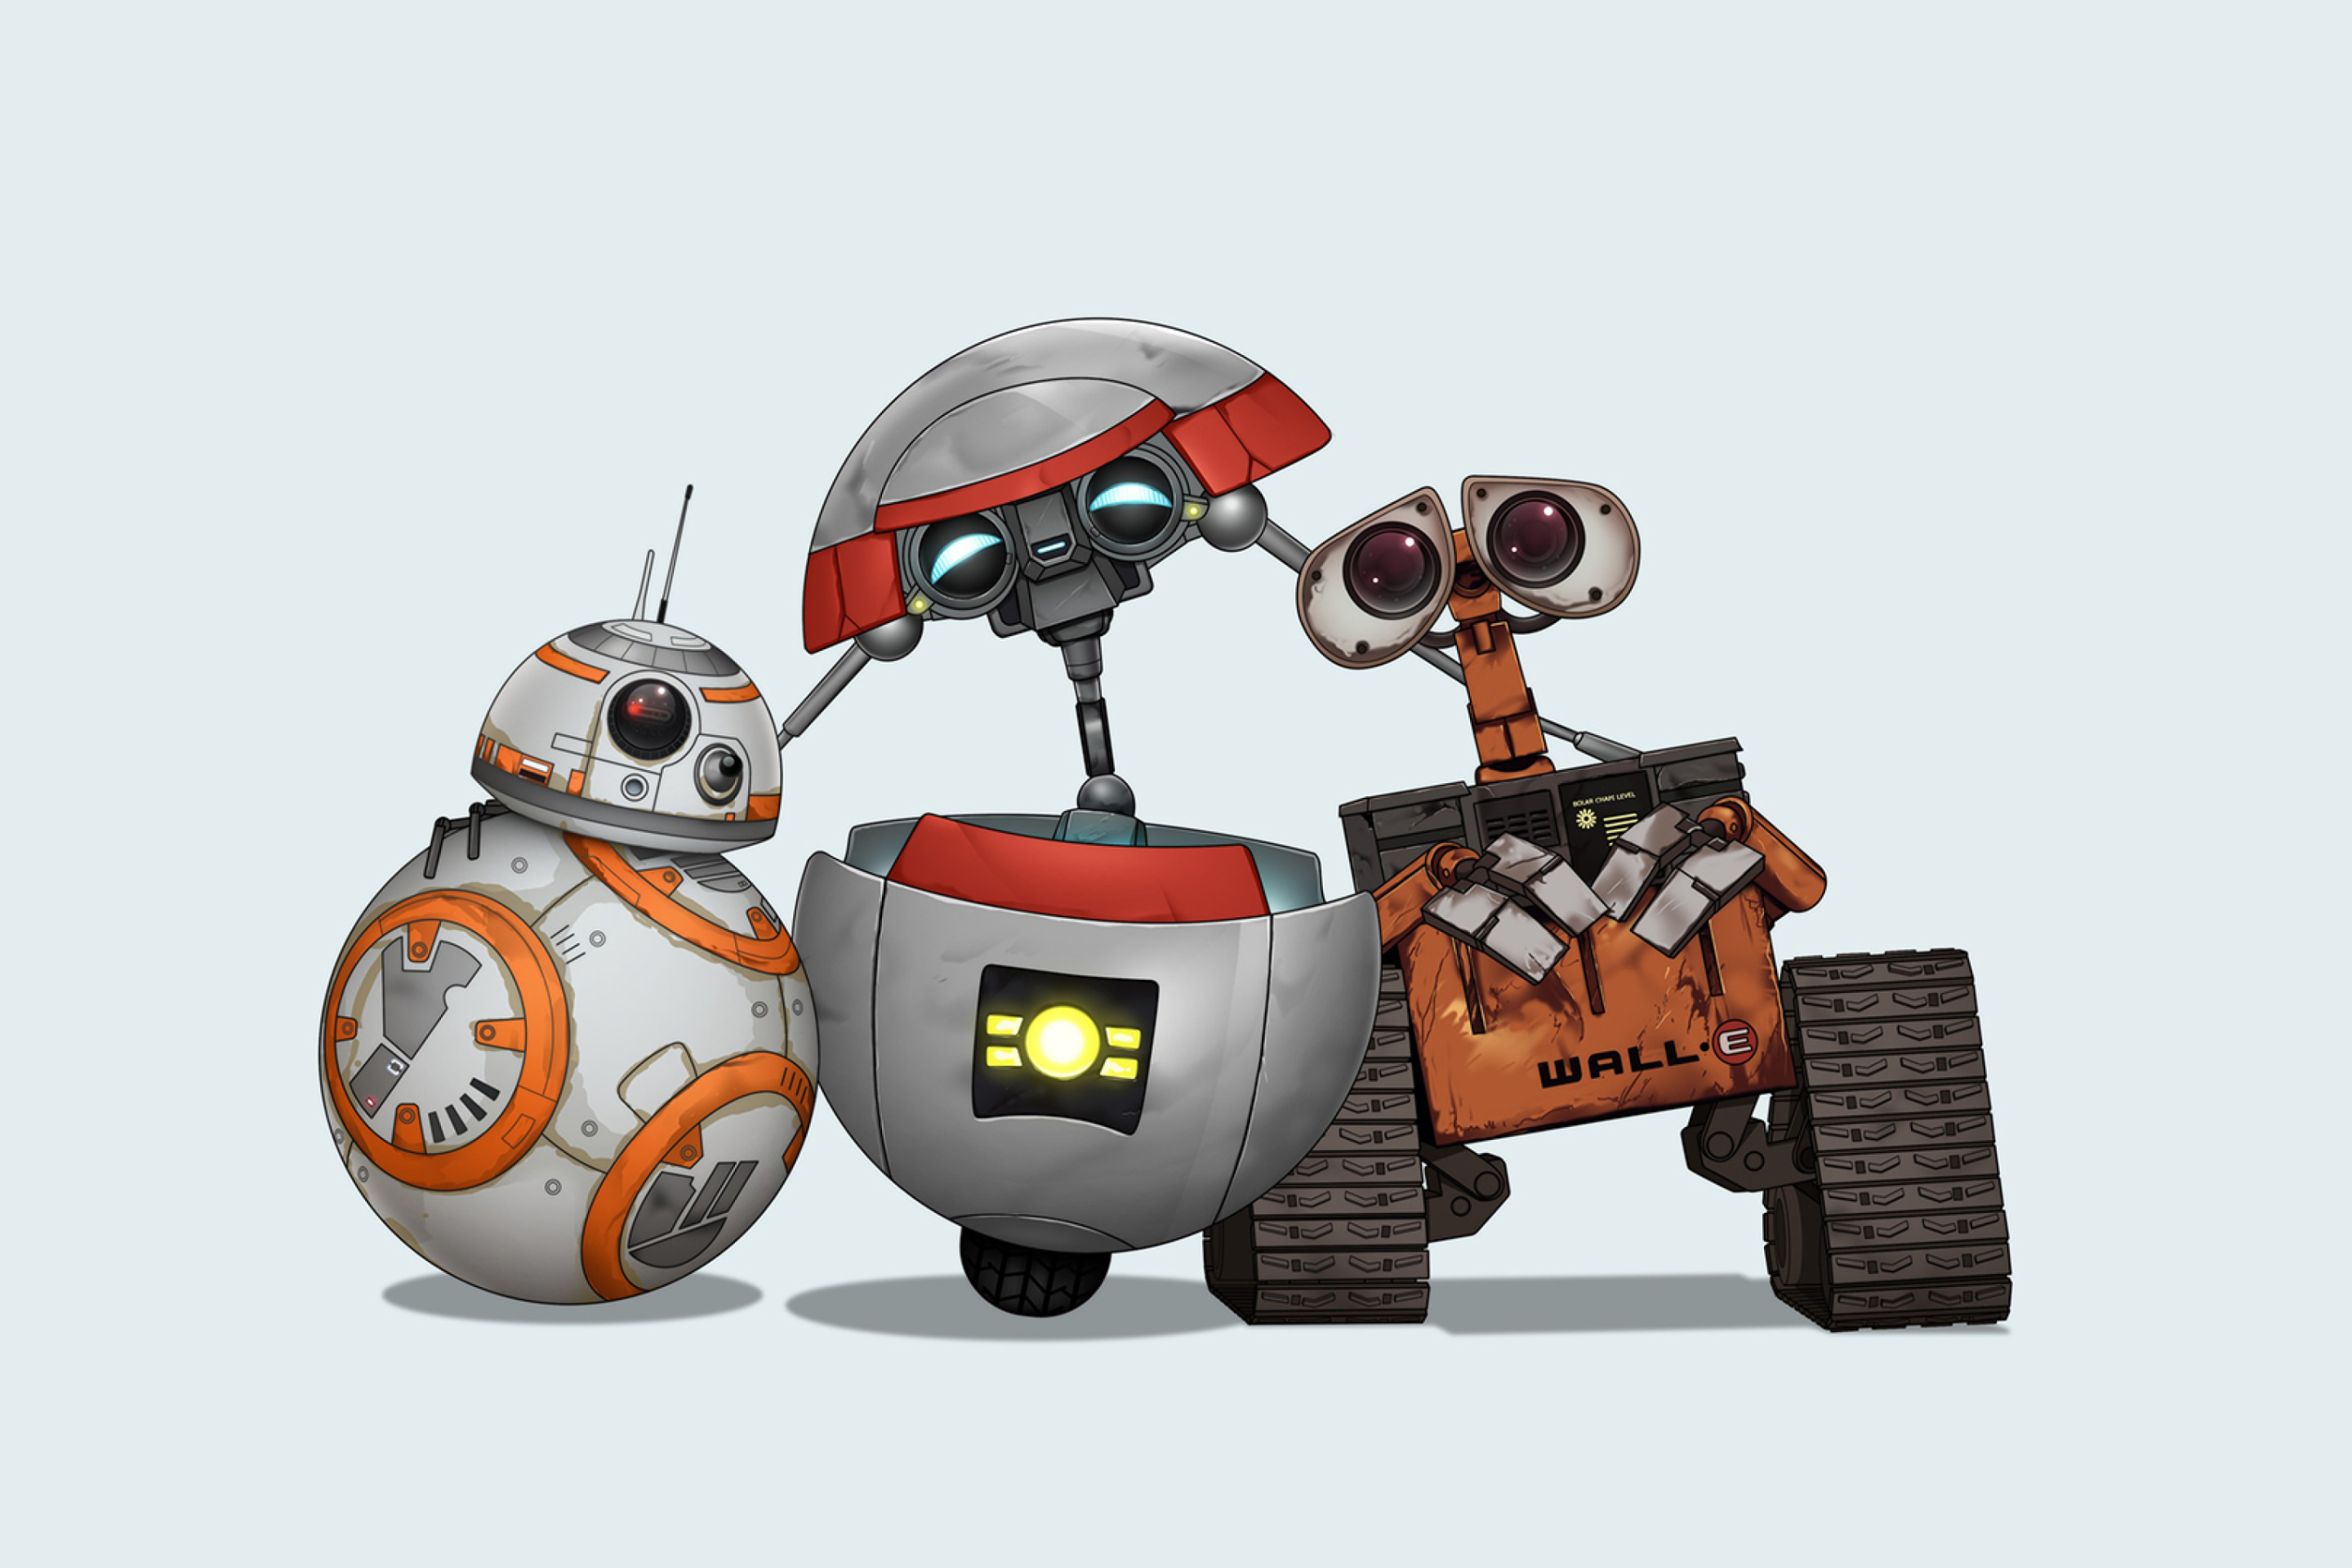 Star Wars and Walle wallpaper 2880x1920